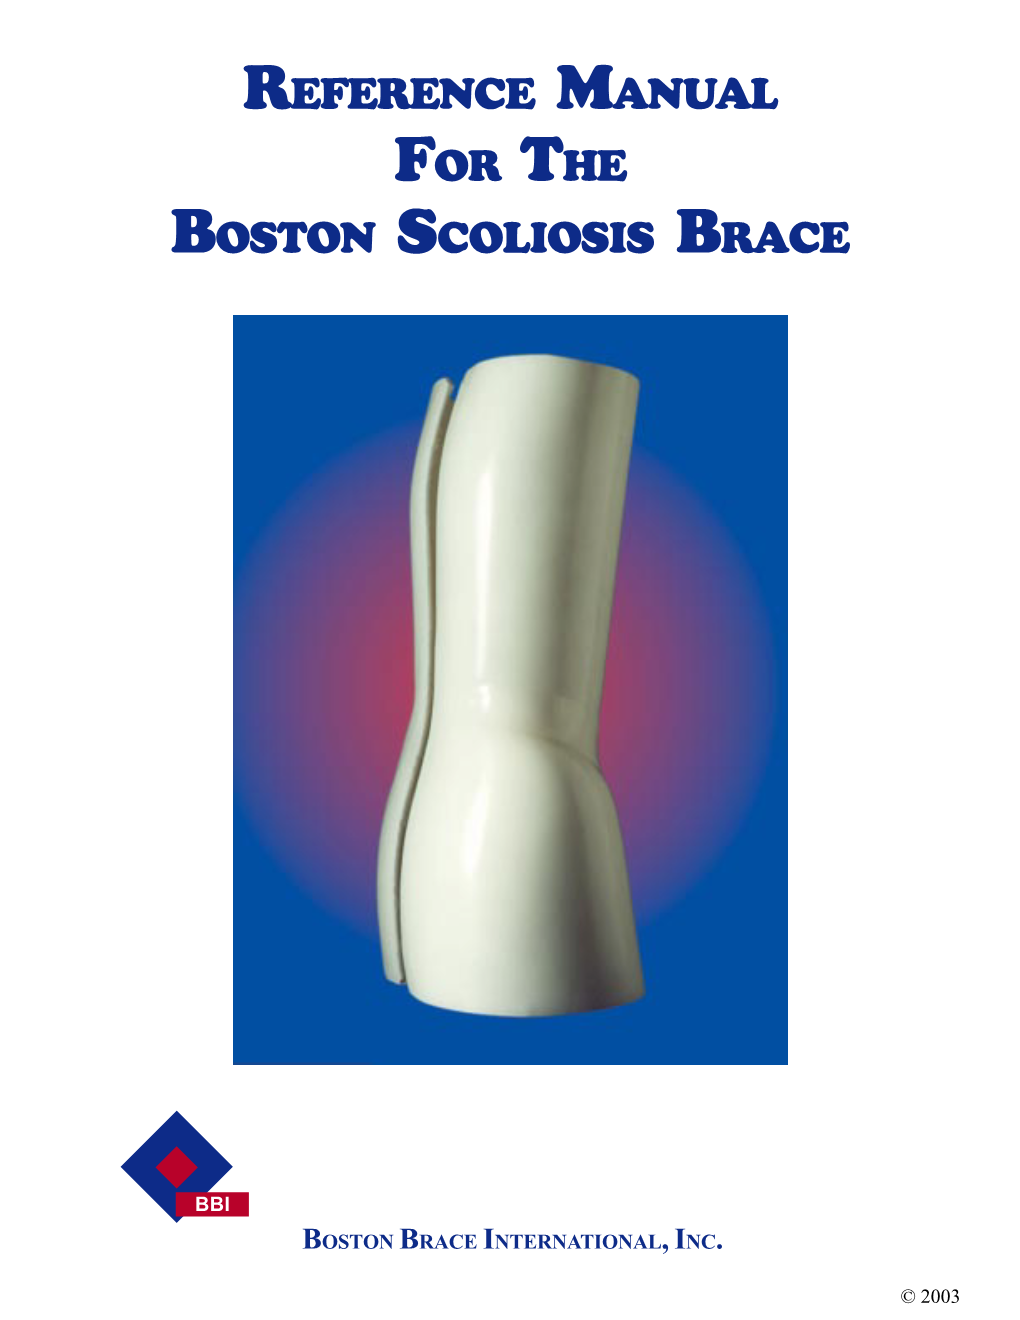 Reference Manual for the Boston Scoliosis Brace